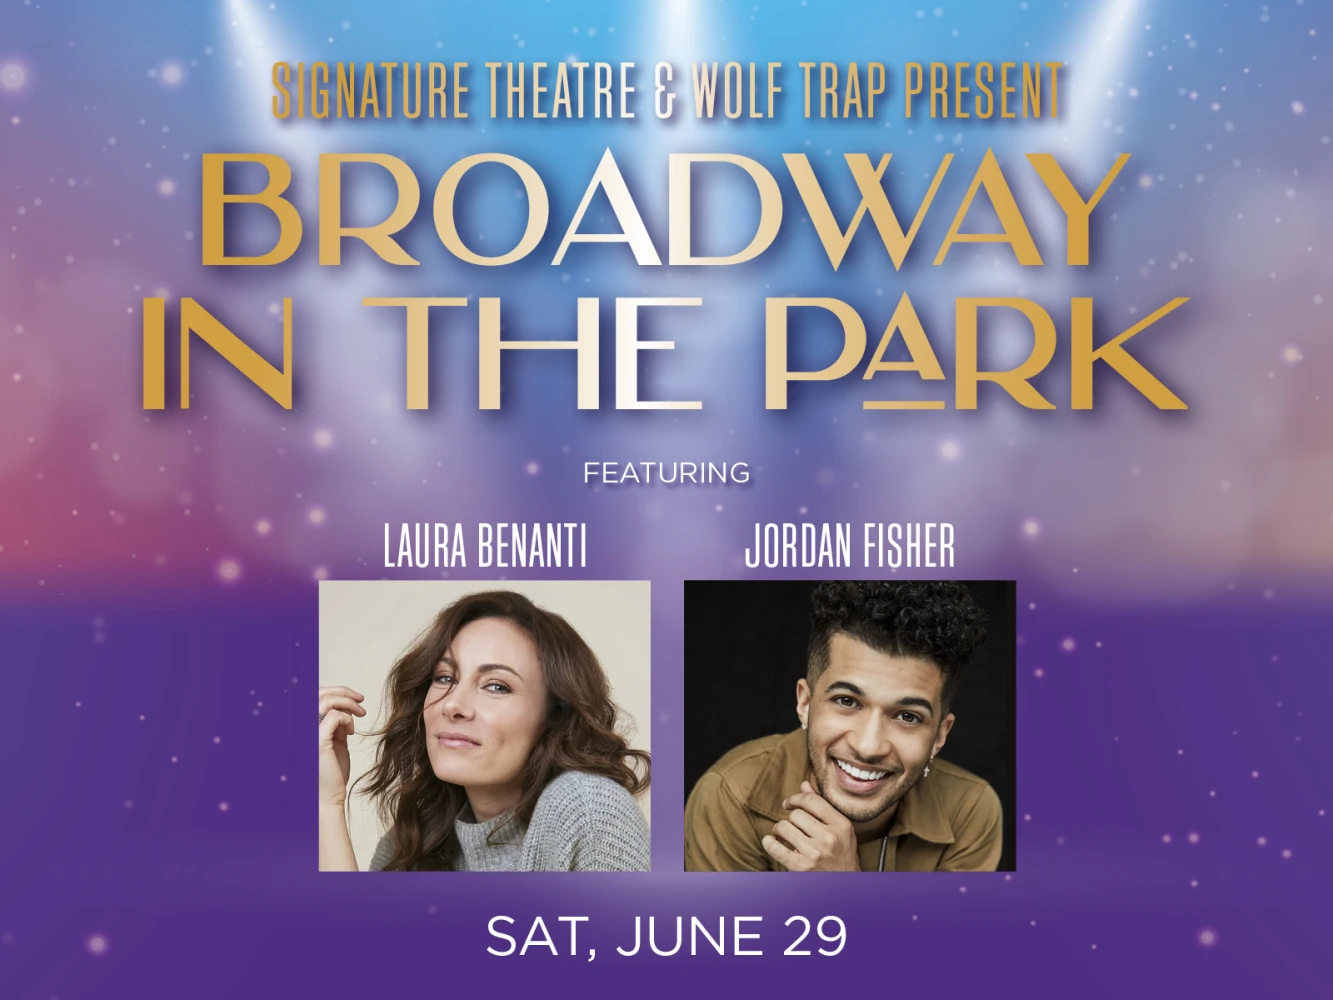 Signature Theatre & Wolf Trap Present Broadway in the Park: What to expect - 1